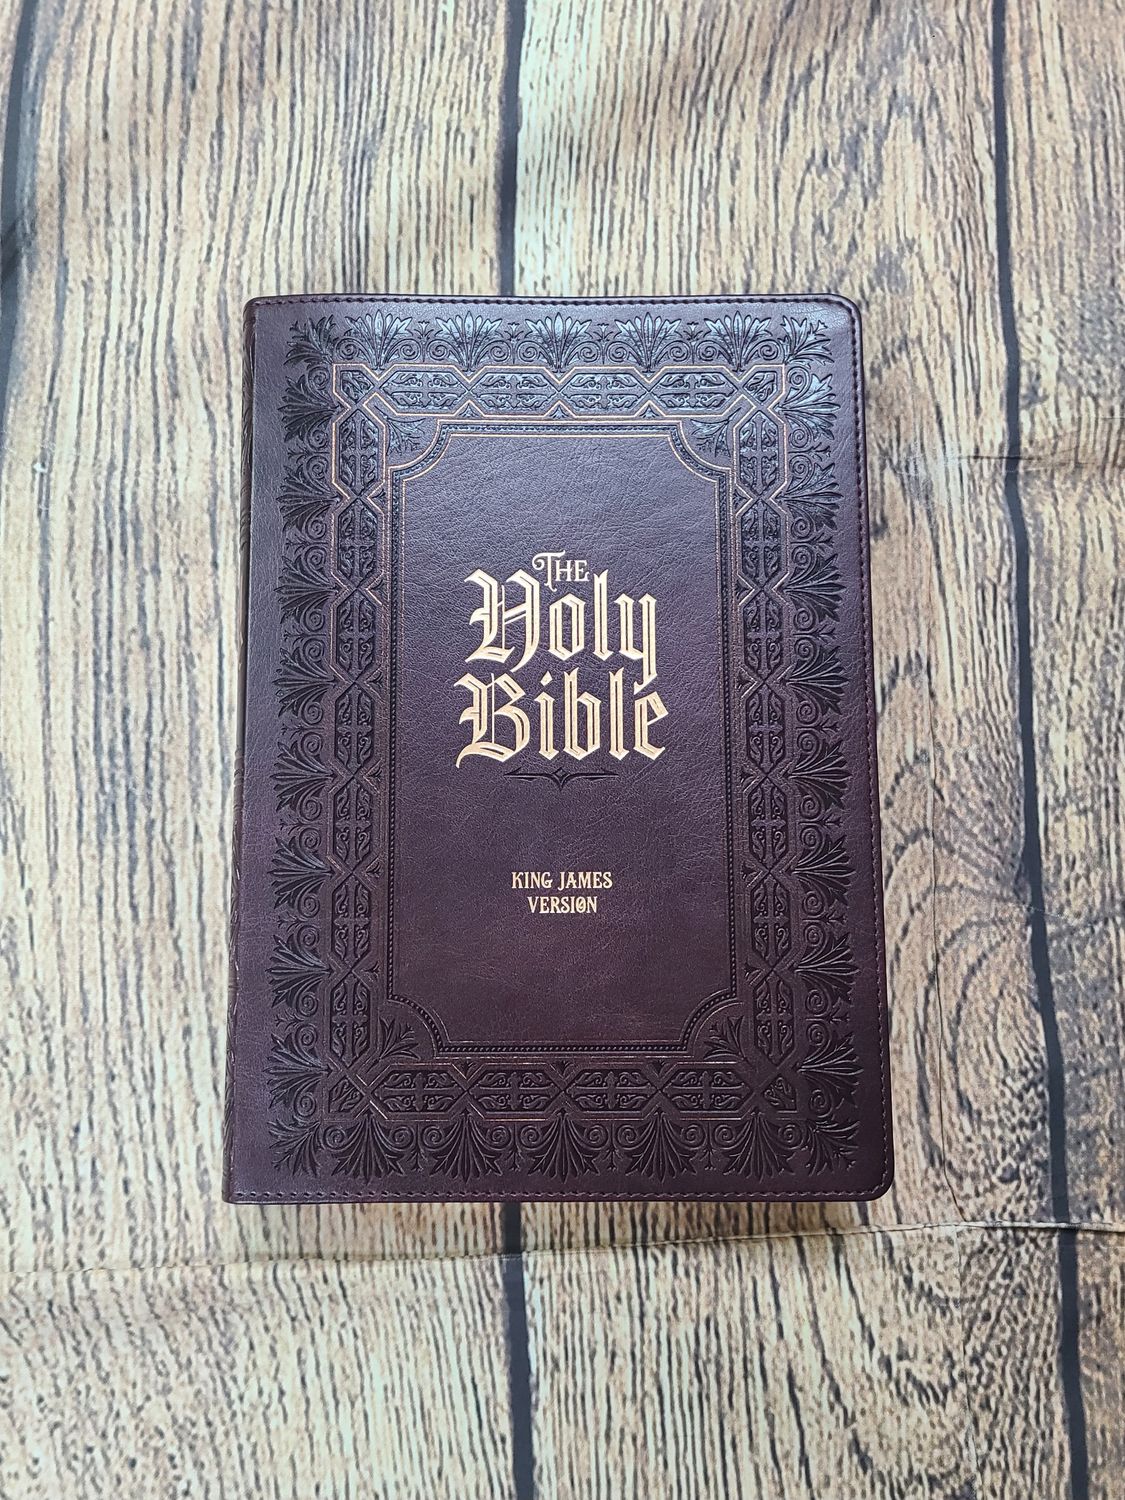 KJV Super Giant Print Bible - Thumb-Indexed - Burgundy Faux Leather